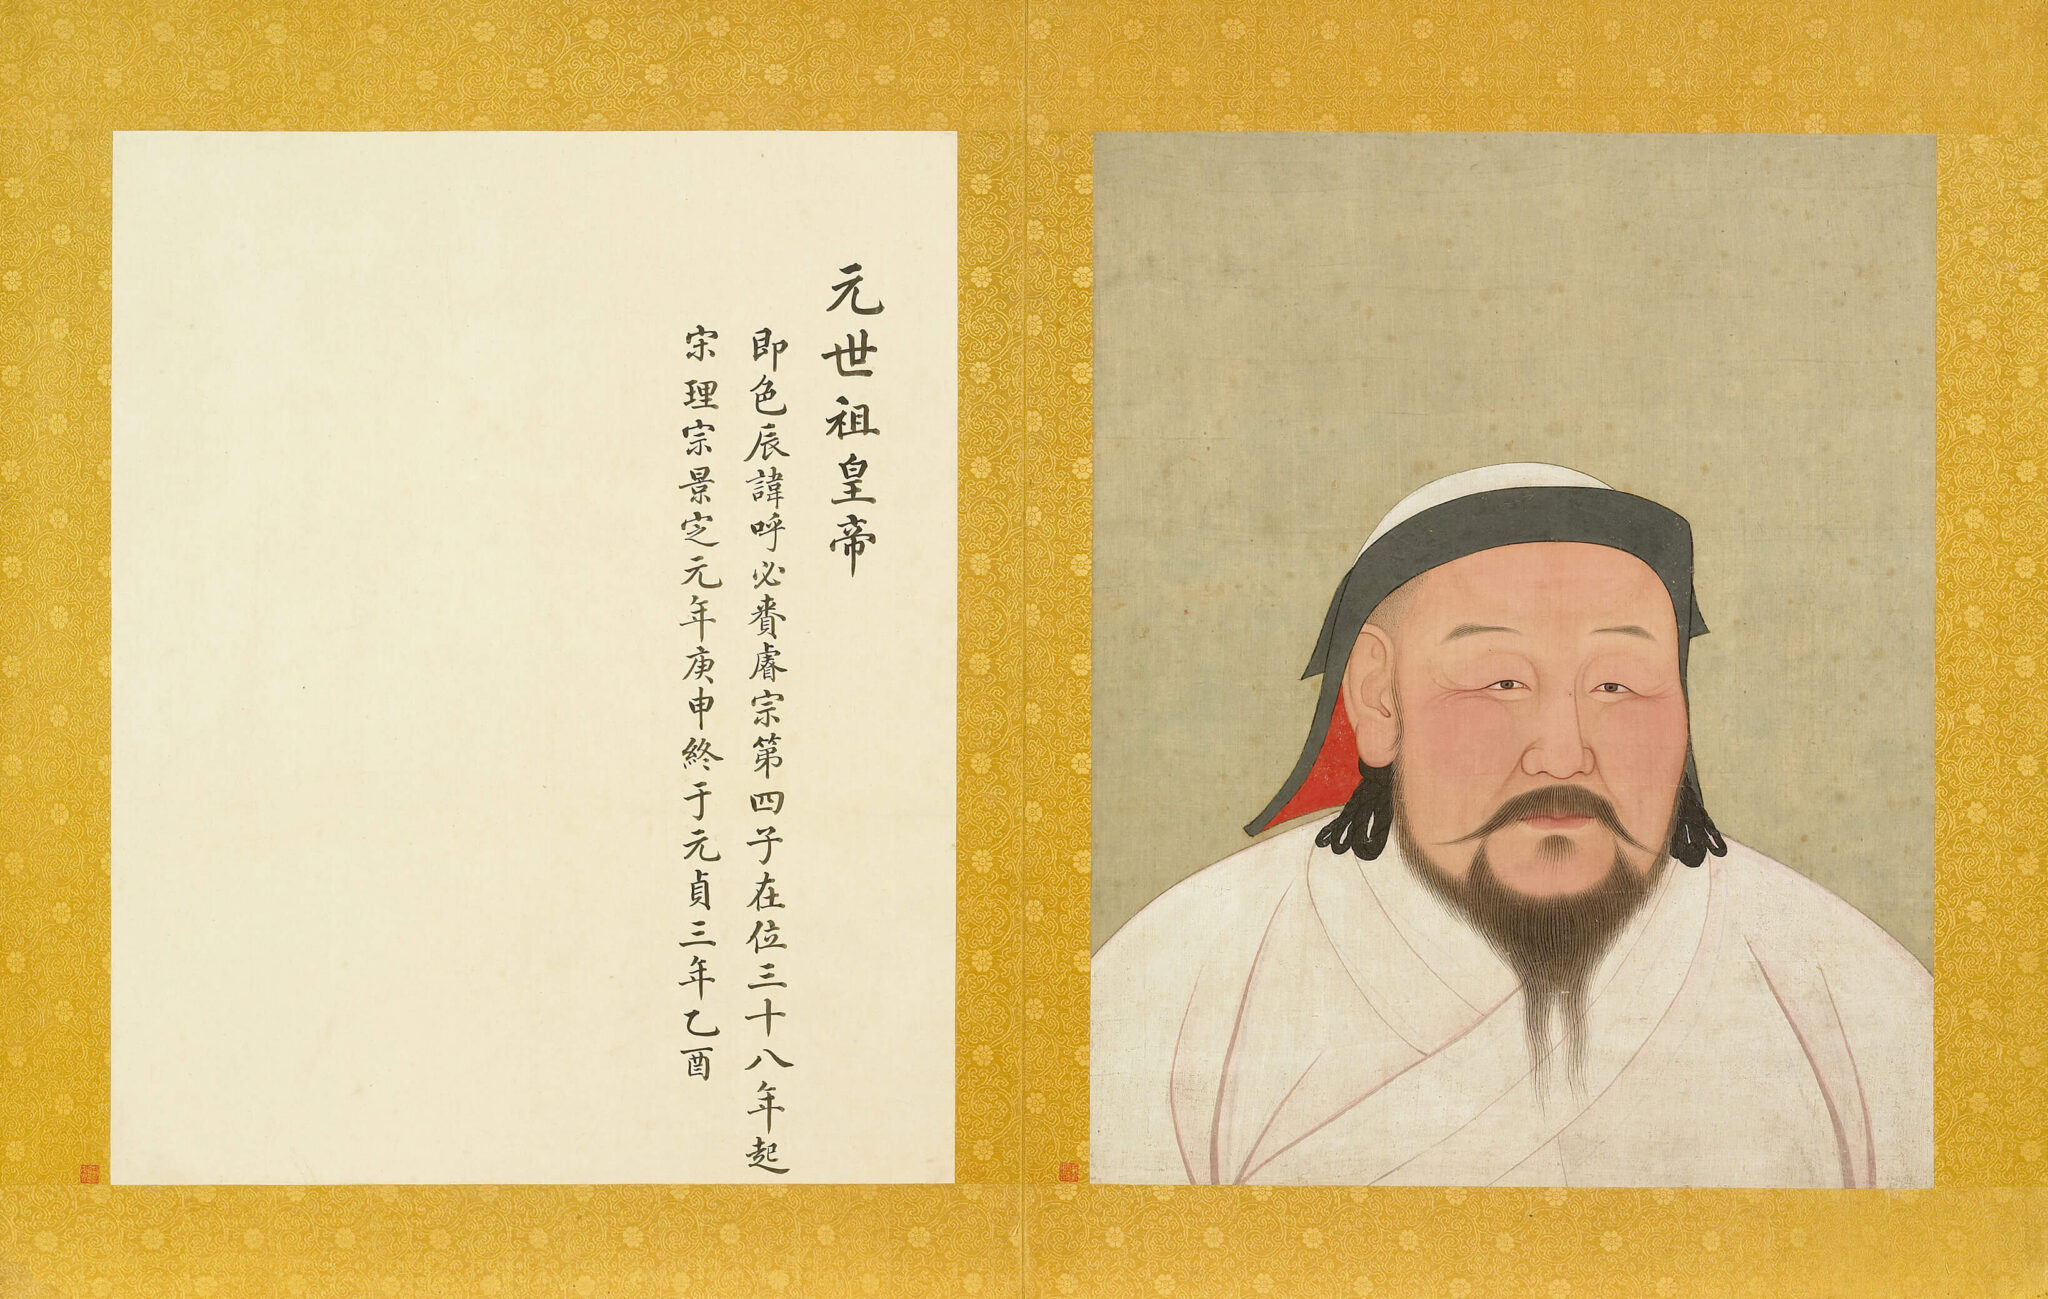 At left, page featuring Chinese script; at right, three-quarter portrait of bearded man; framed and separated by yellow border